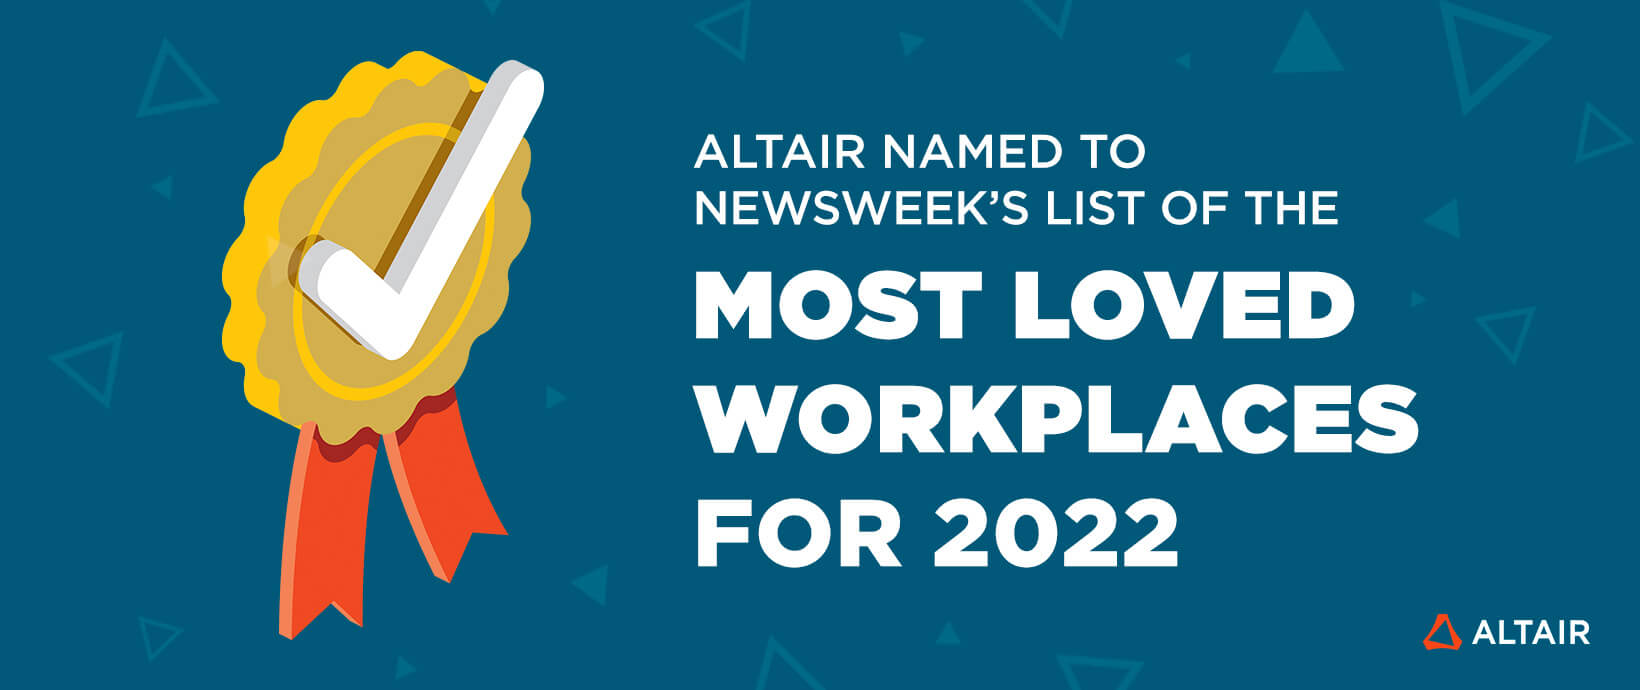 Altair Named to Newsweek’s List of the Most Loved Workplaces for 2022